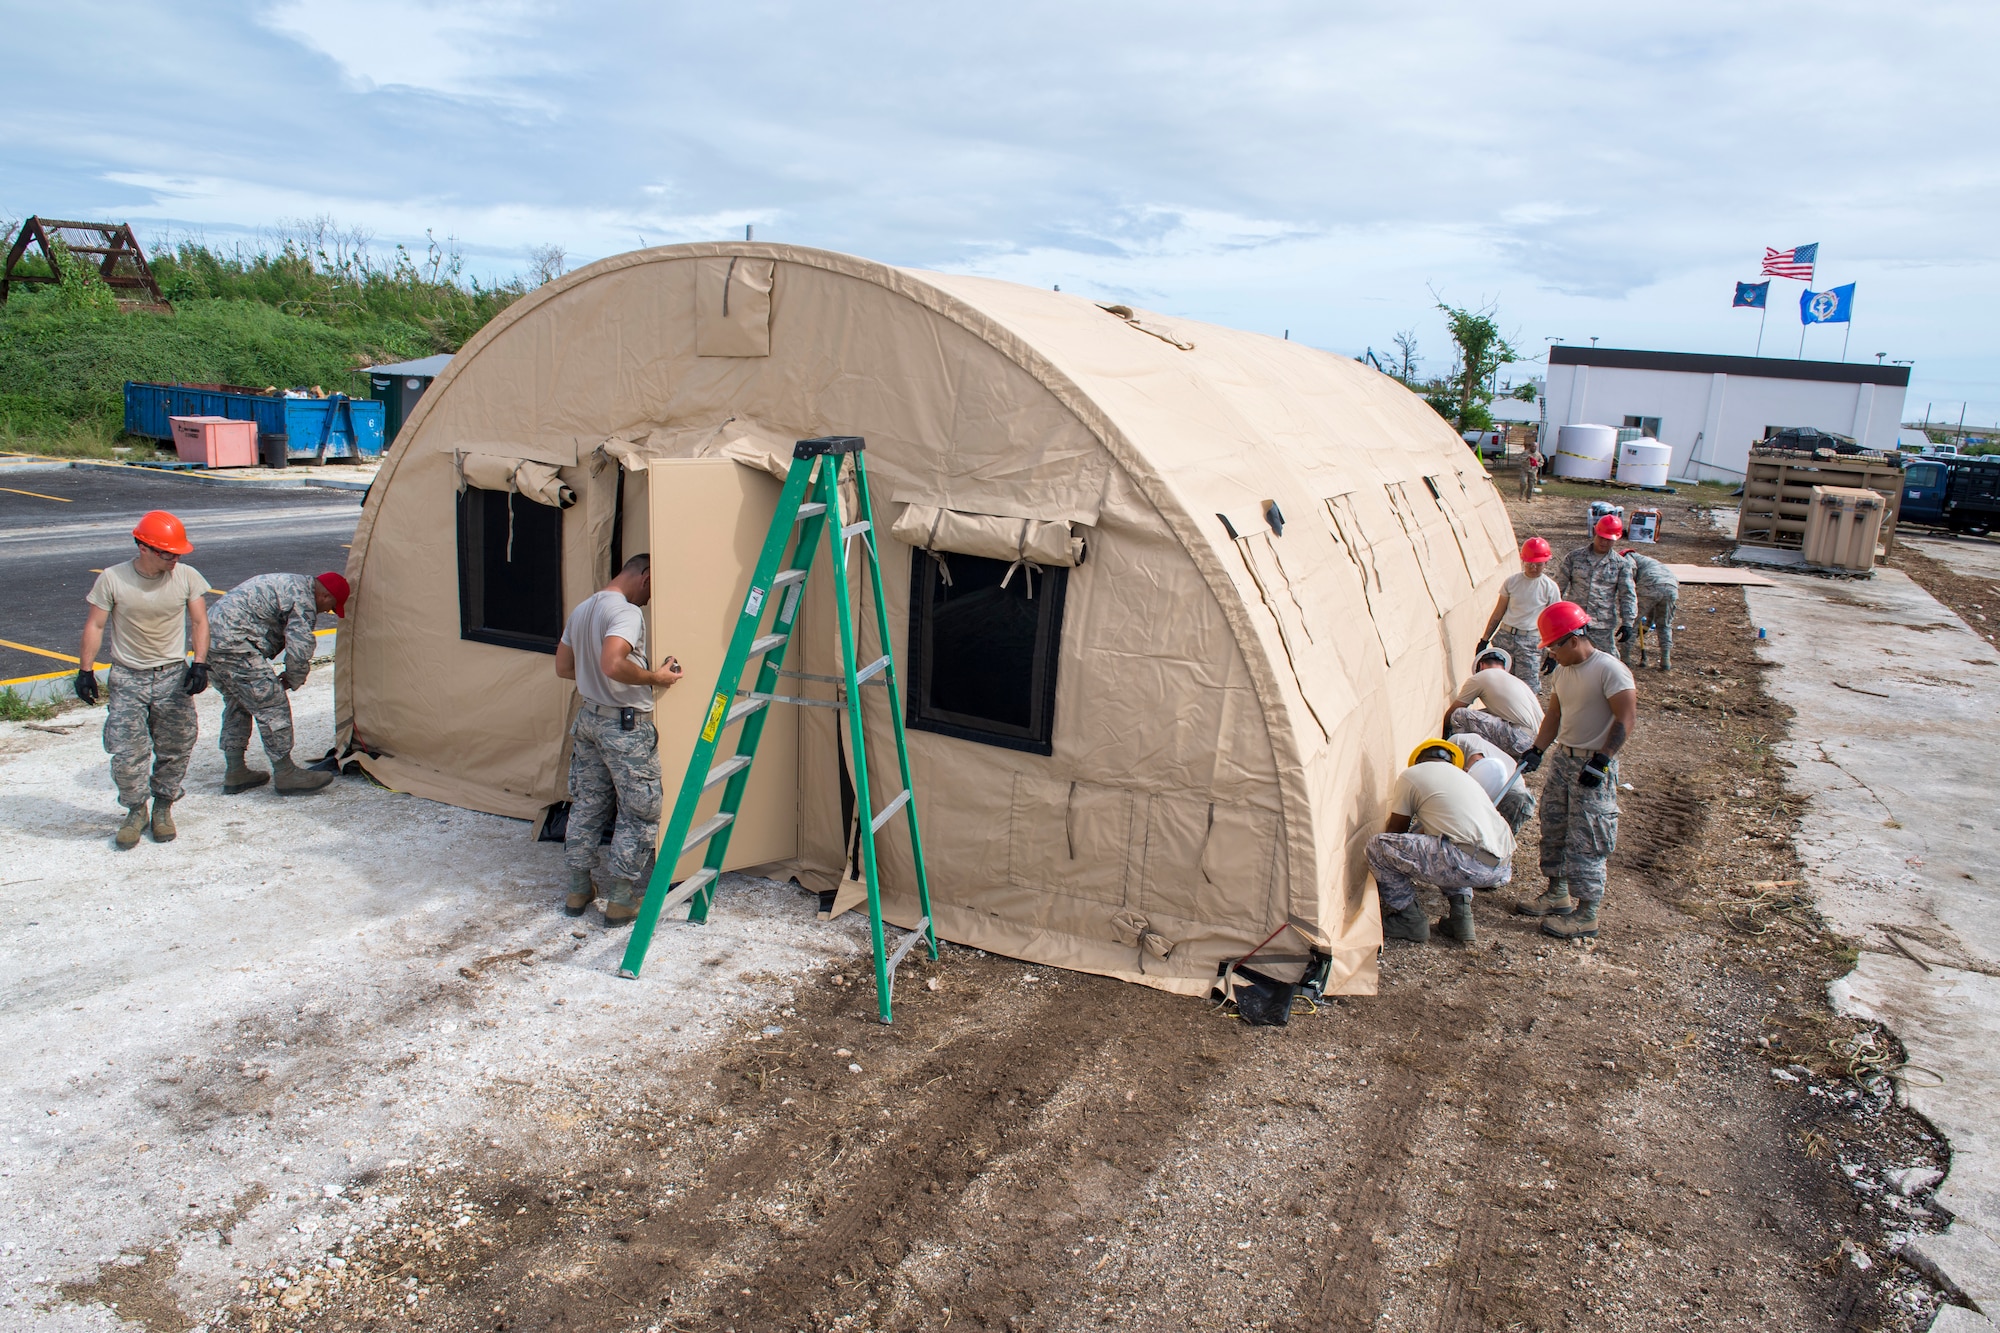 Members of the 254th Rapid Engineer Deployable Heavy Operational Repair Squadron Engineers and the 36th Civil Engineer Squadron build an Alaskan Small Shelter System in the village of Koblerville, Saipan, Commonwealth of the Northern Mariana Islands, Nov. 23, 2018.